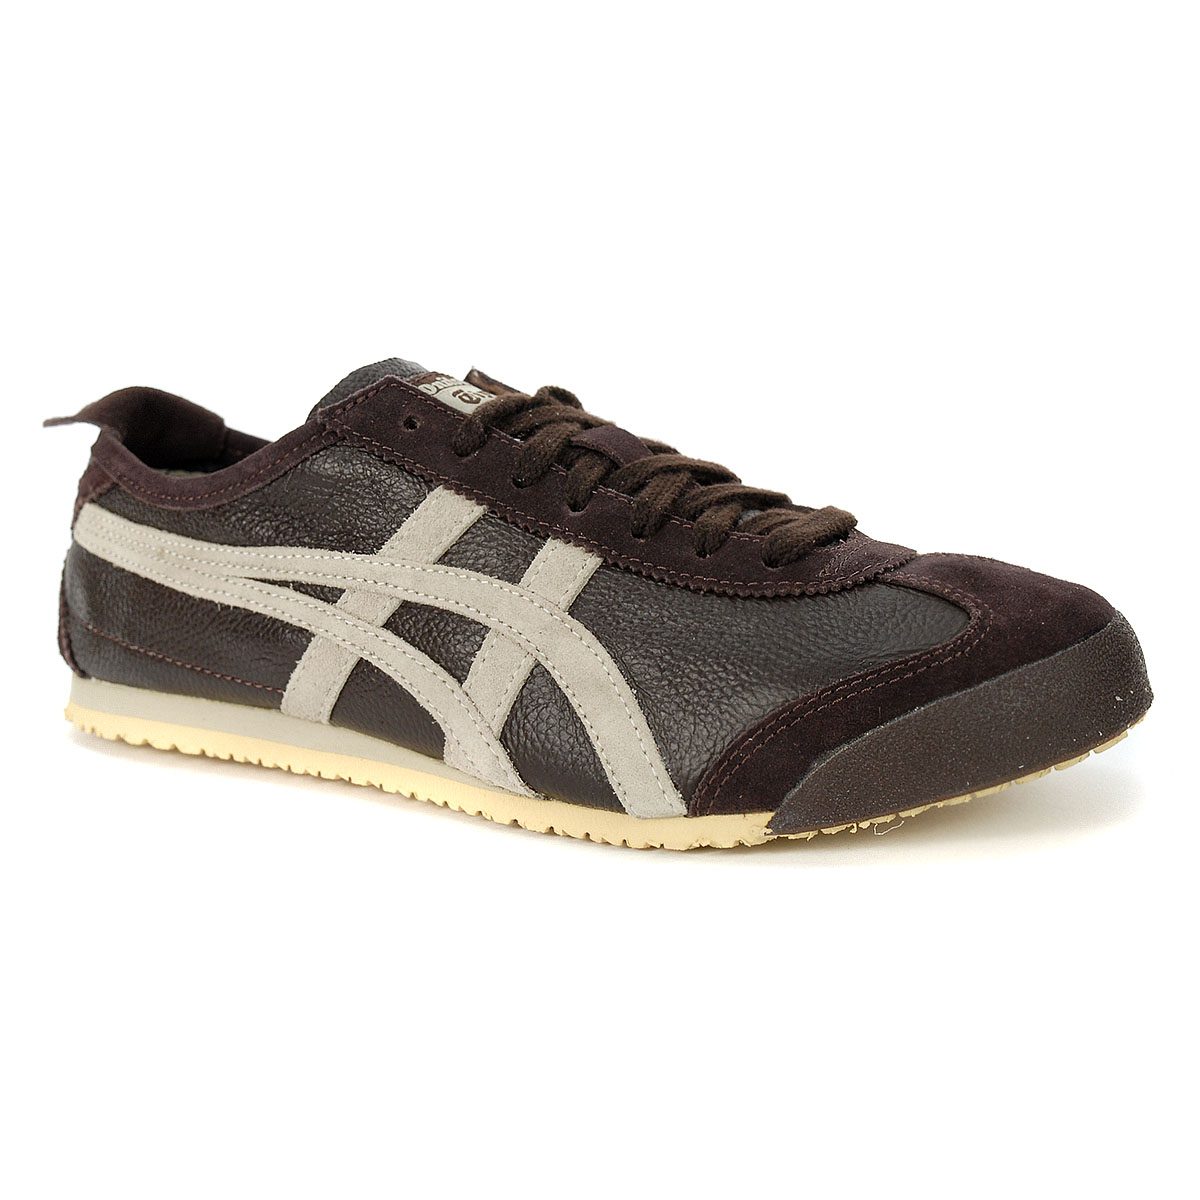 ASICS Men's Onitsuka Tiger Mexico 66 VIN Coffee/Feather Grey Sneakers ...